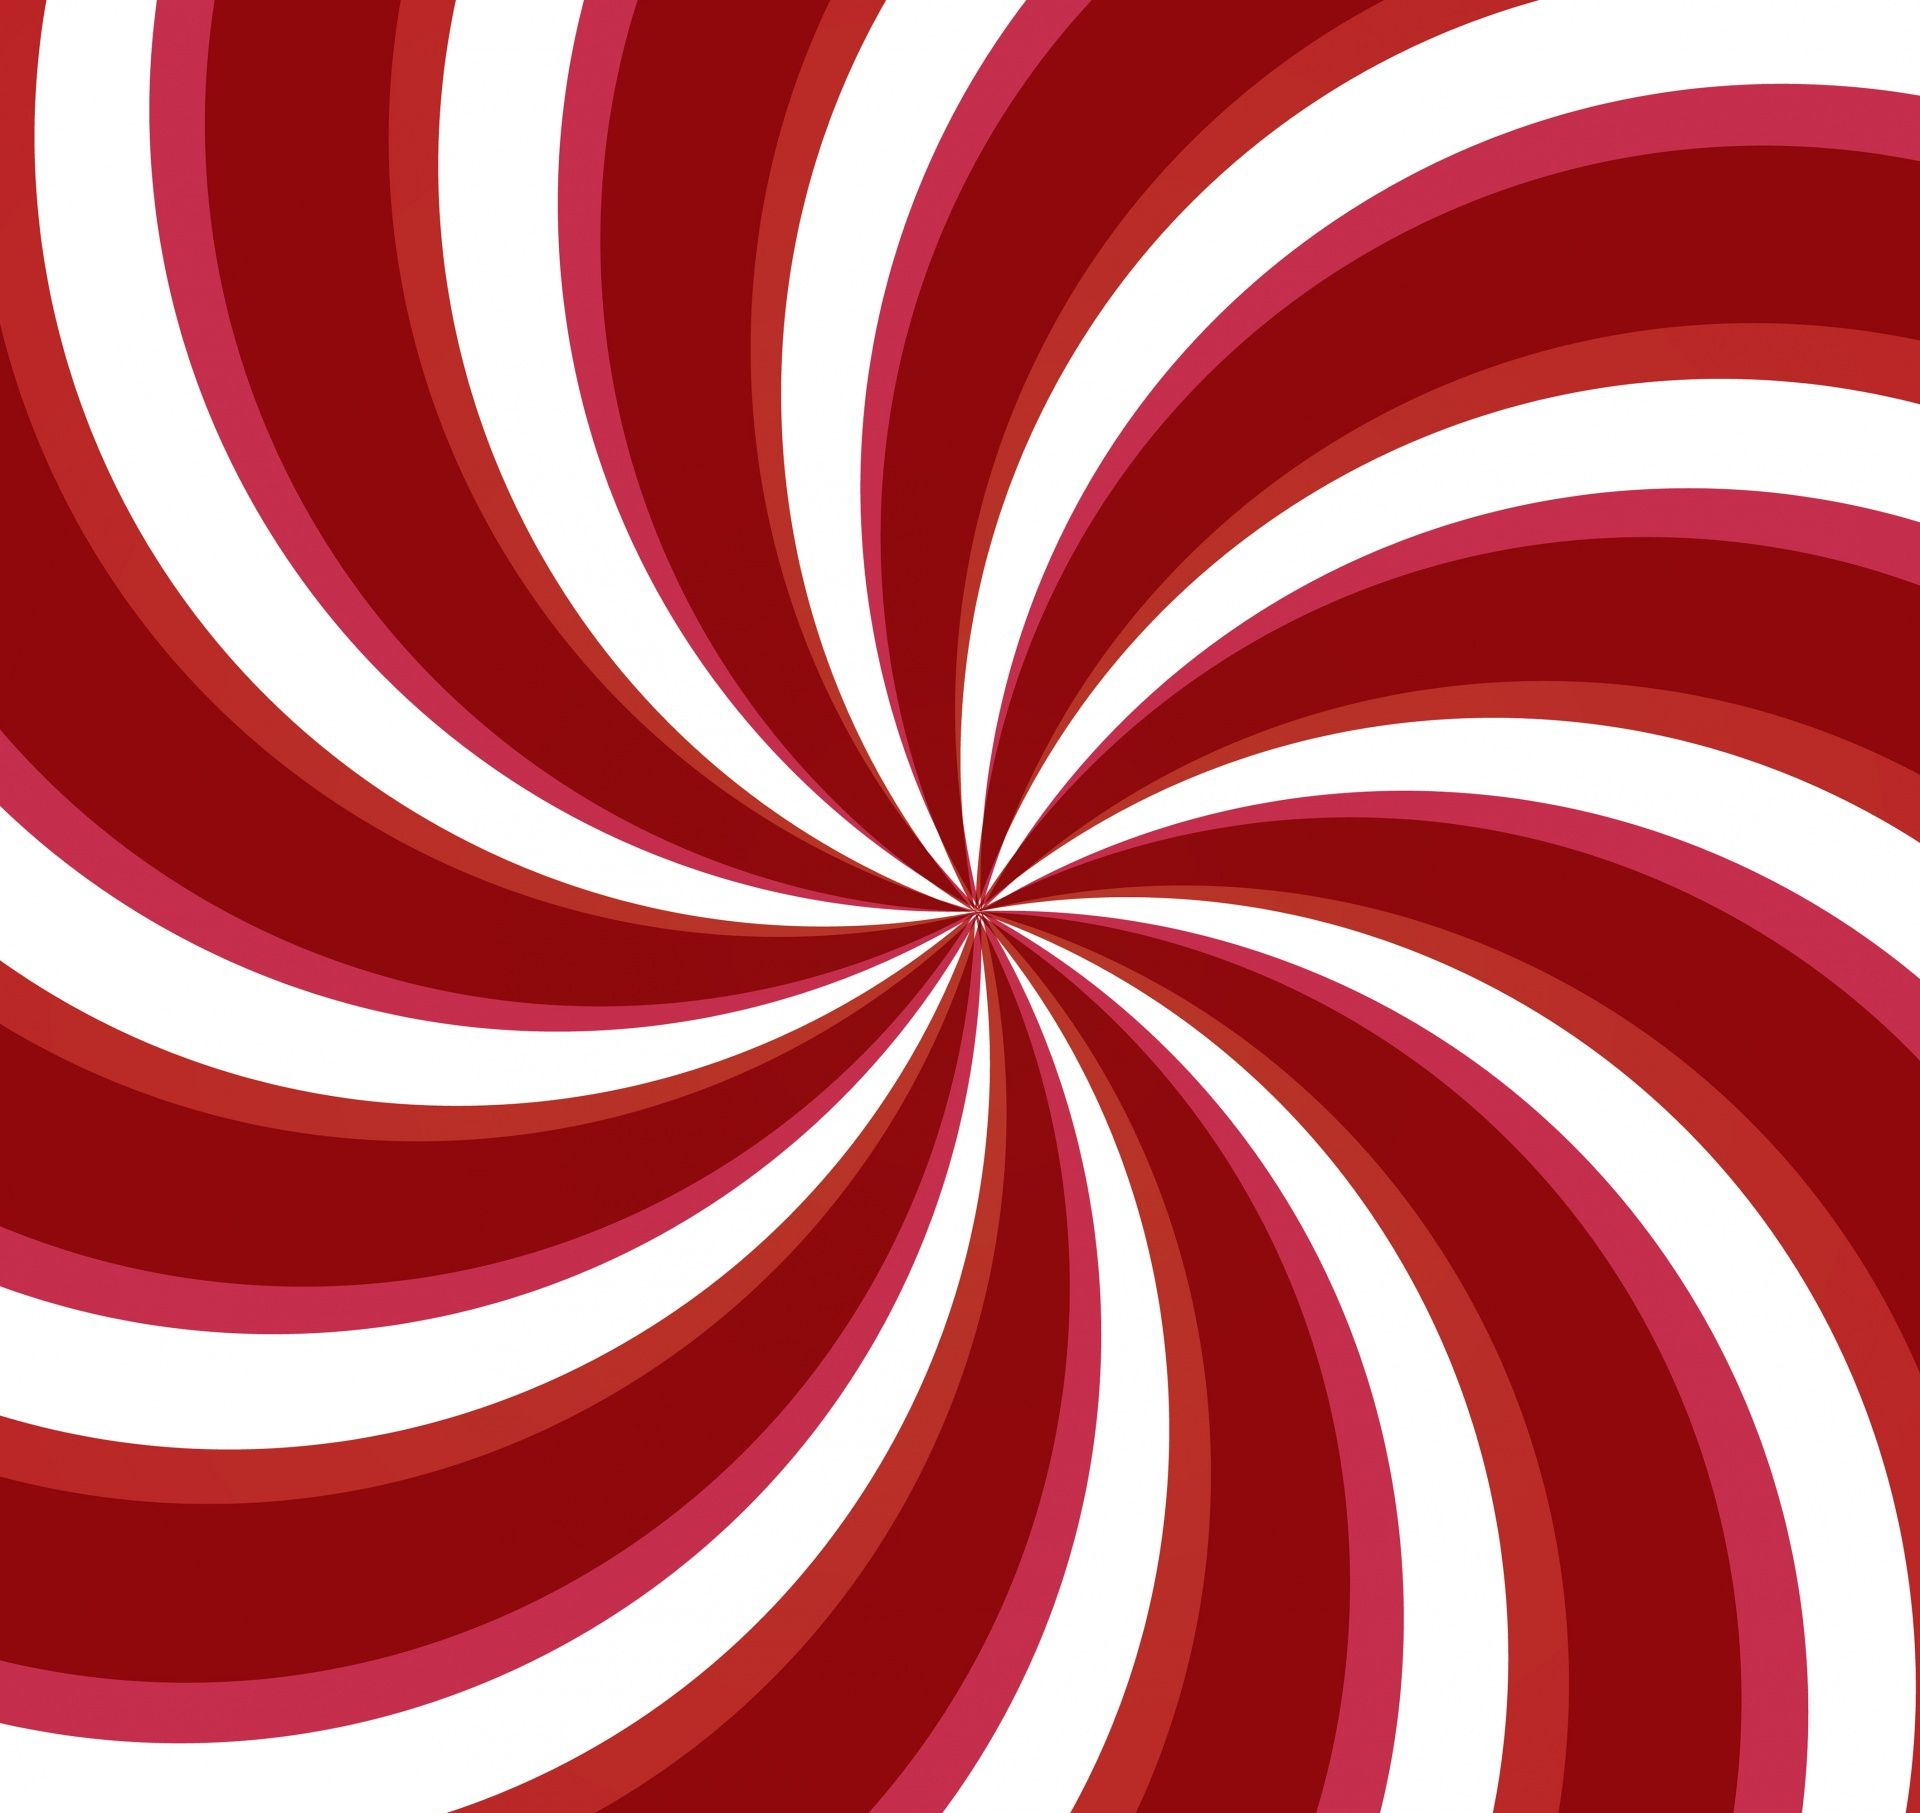 1920x1813 Swirls Red White Background | White background, Christmas wallpaper, Red and white